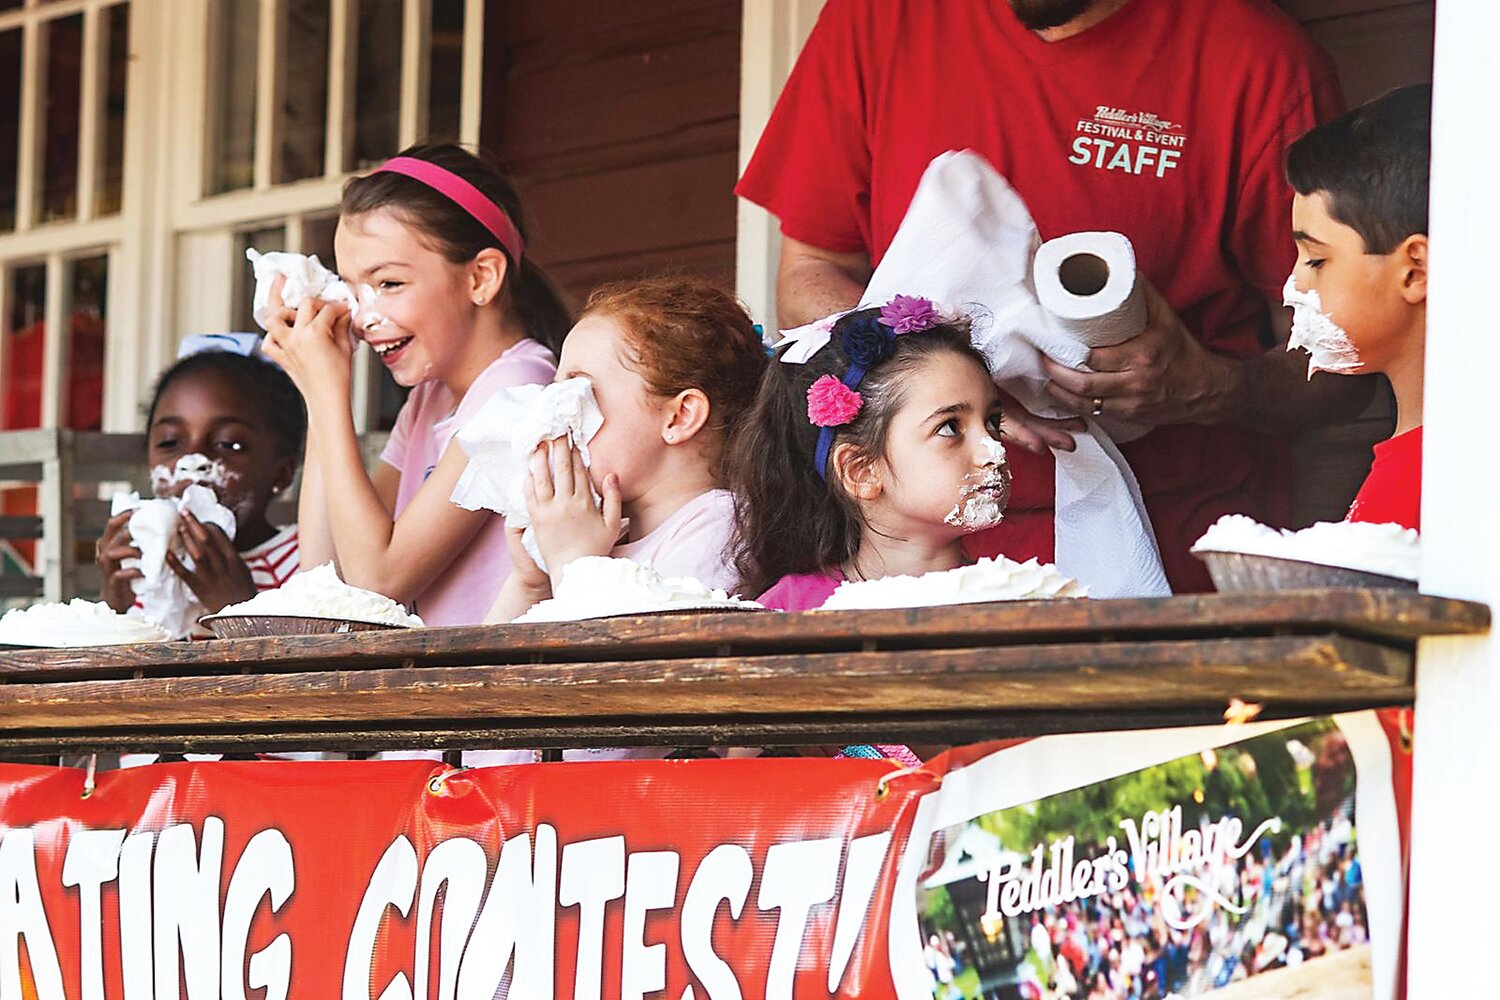 Children take part in a pie-eating contest at a previous Strawberry Festival at Peddler’s Village. The upcoming event includes contests for children and adults.